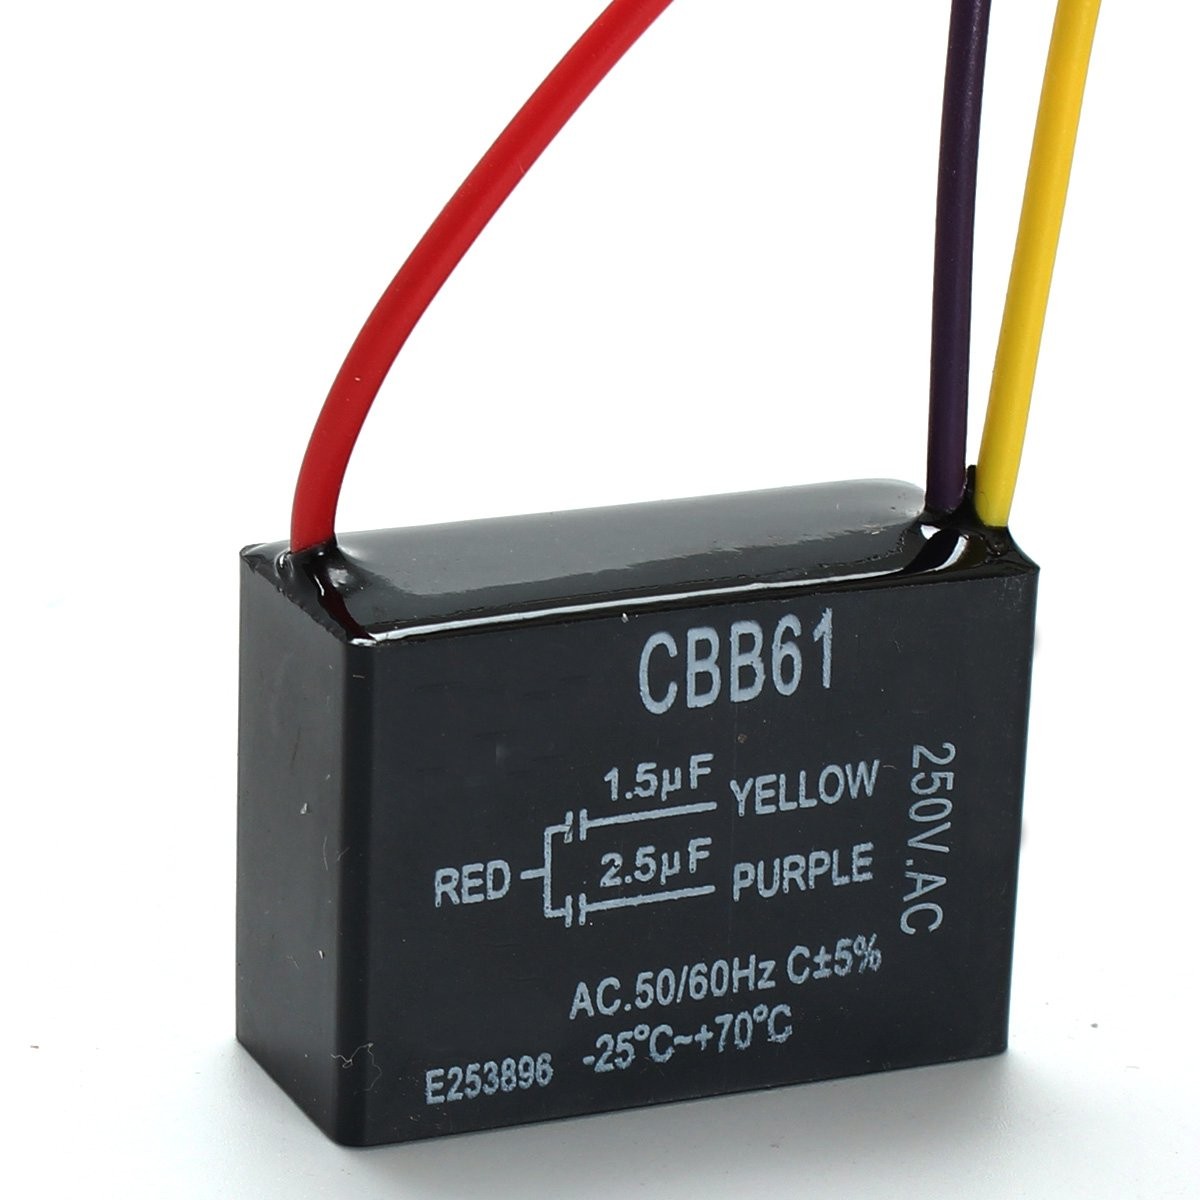 CBB61 1.5uF+2.5uF 3 WIRE 250VAC Ceiling Fan Capacitor 3 Wires 7